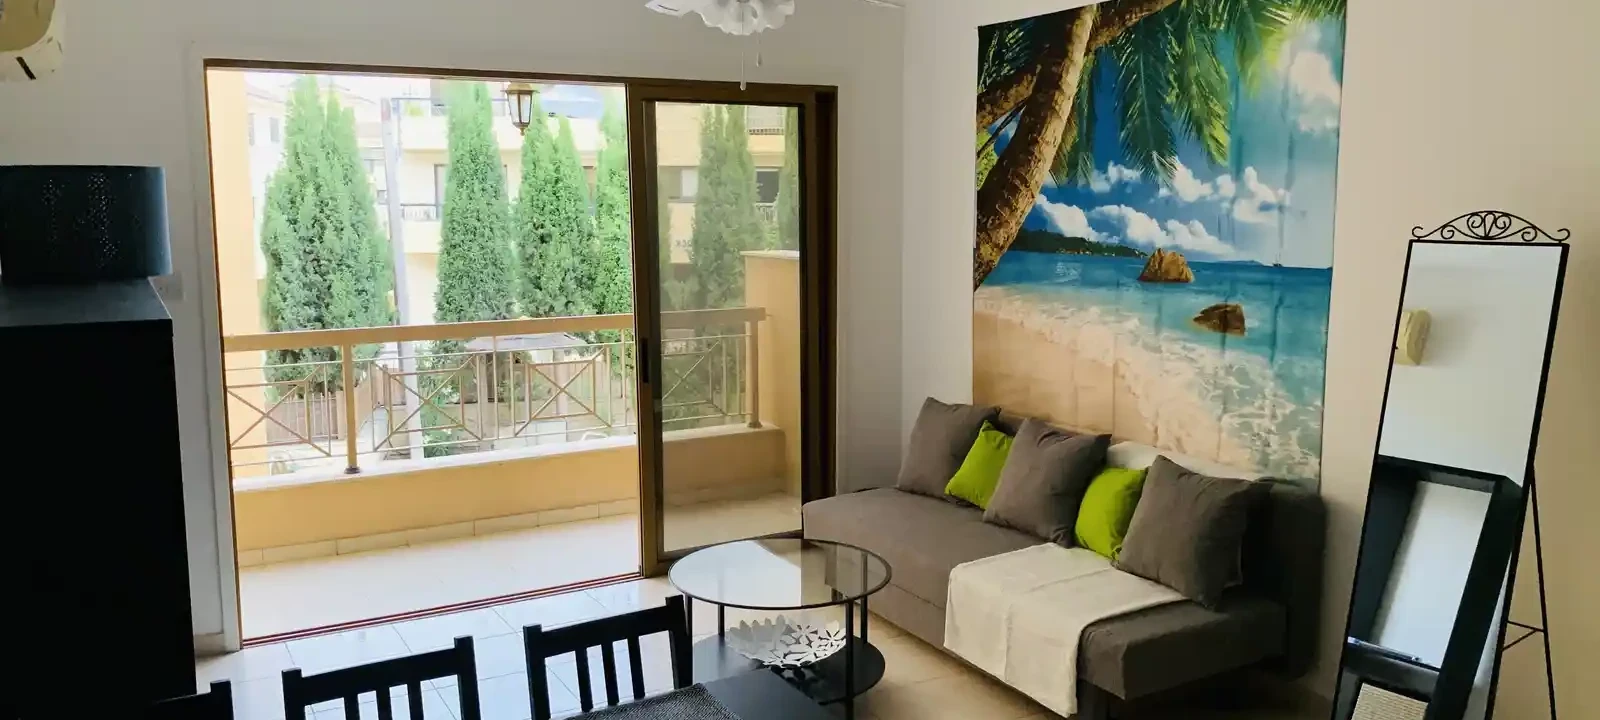 1-bedroom apartment fоr sаle €98.000, image 1